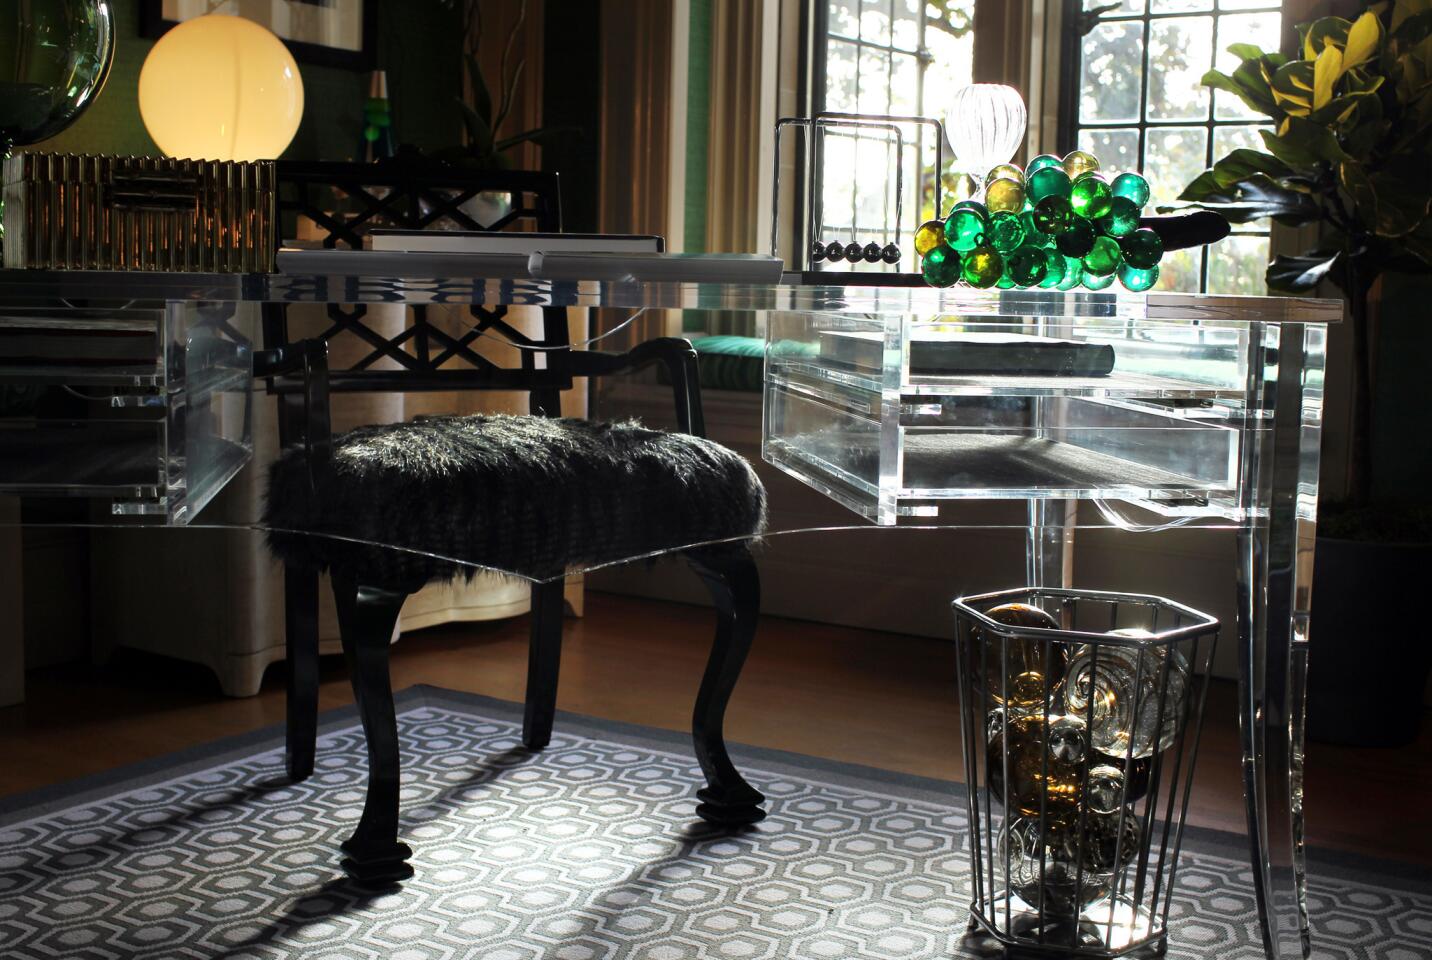 Michael Ostrow of Grace Home Furnishings added a Lucite desk to the emerald green bedroom he designed with fashion designer Halston in mind.